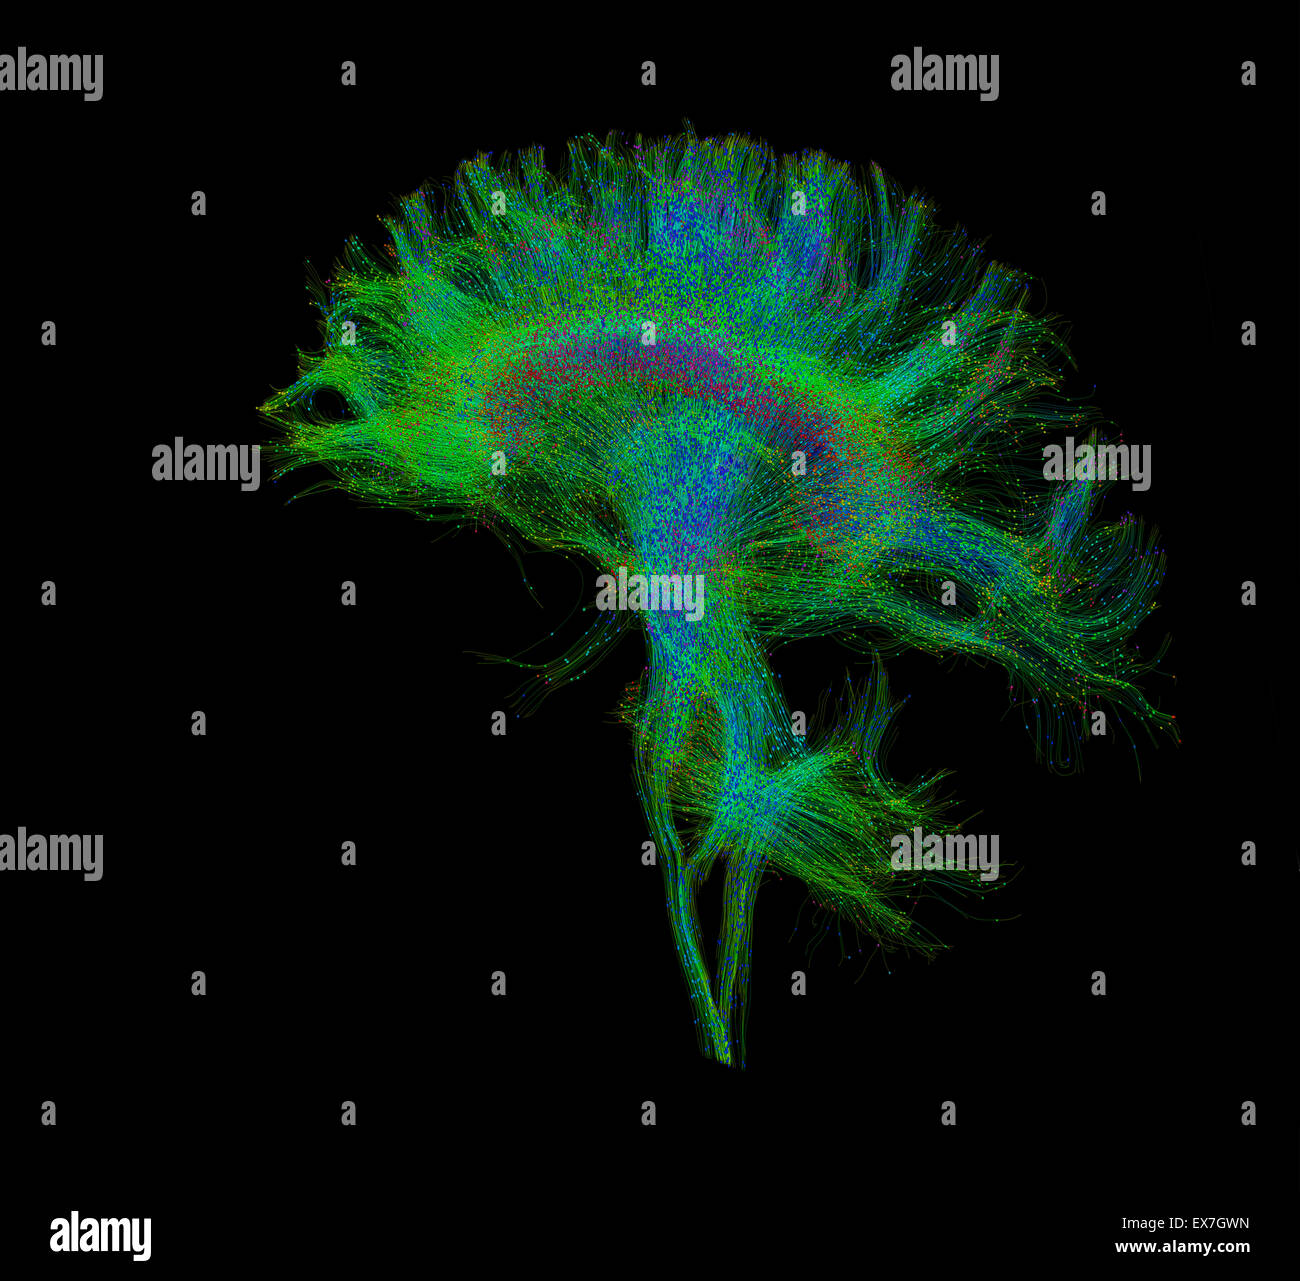 Fiber tractography image of the human brain Stock Photo